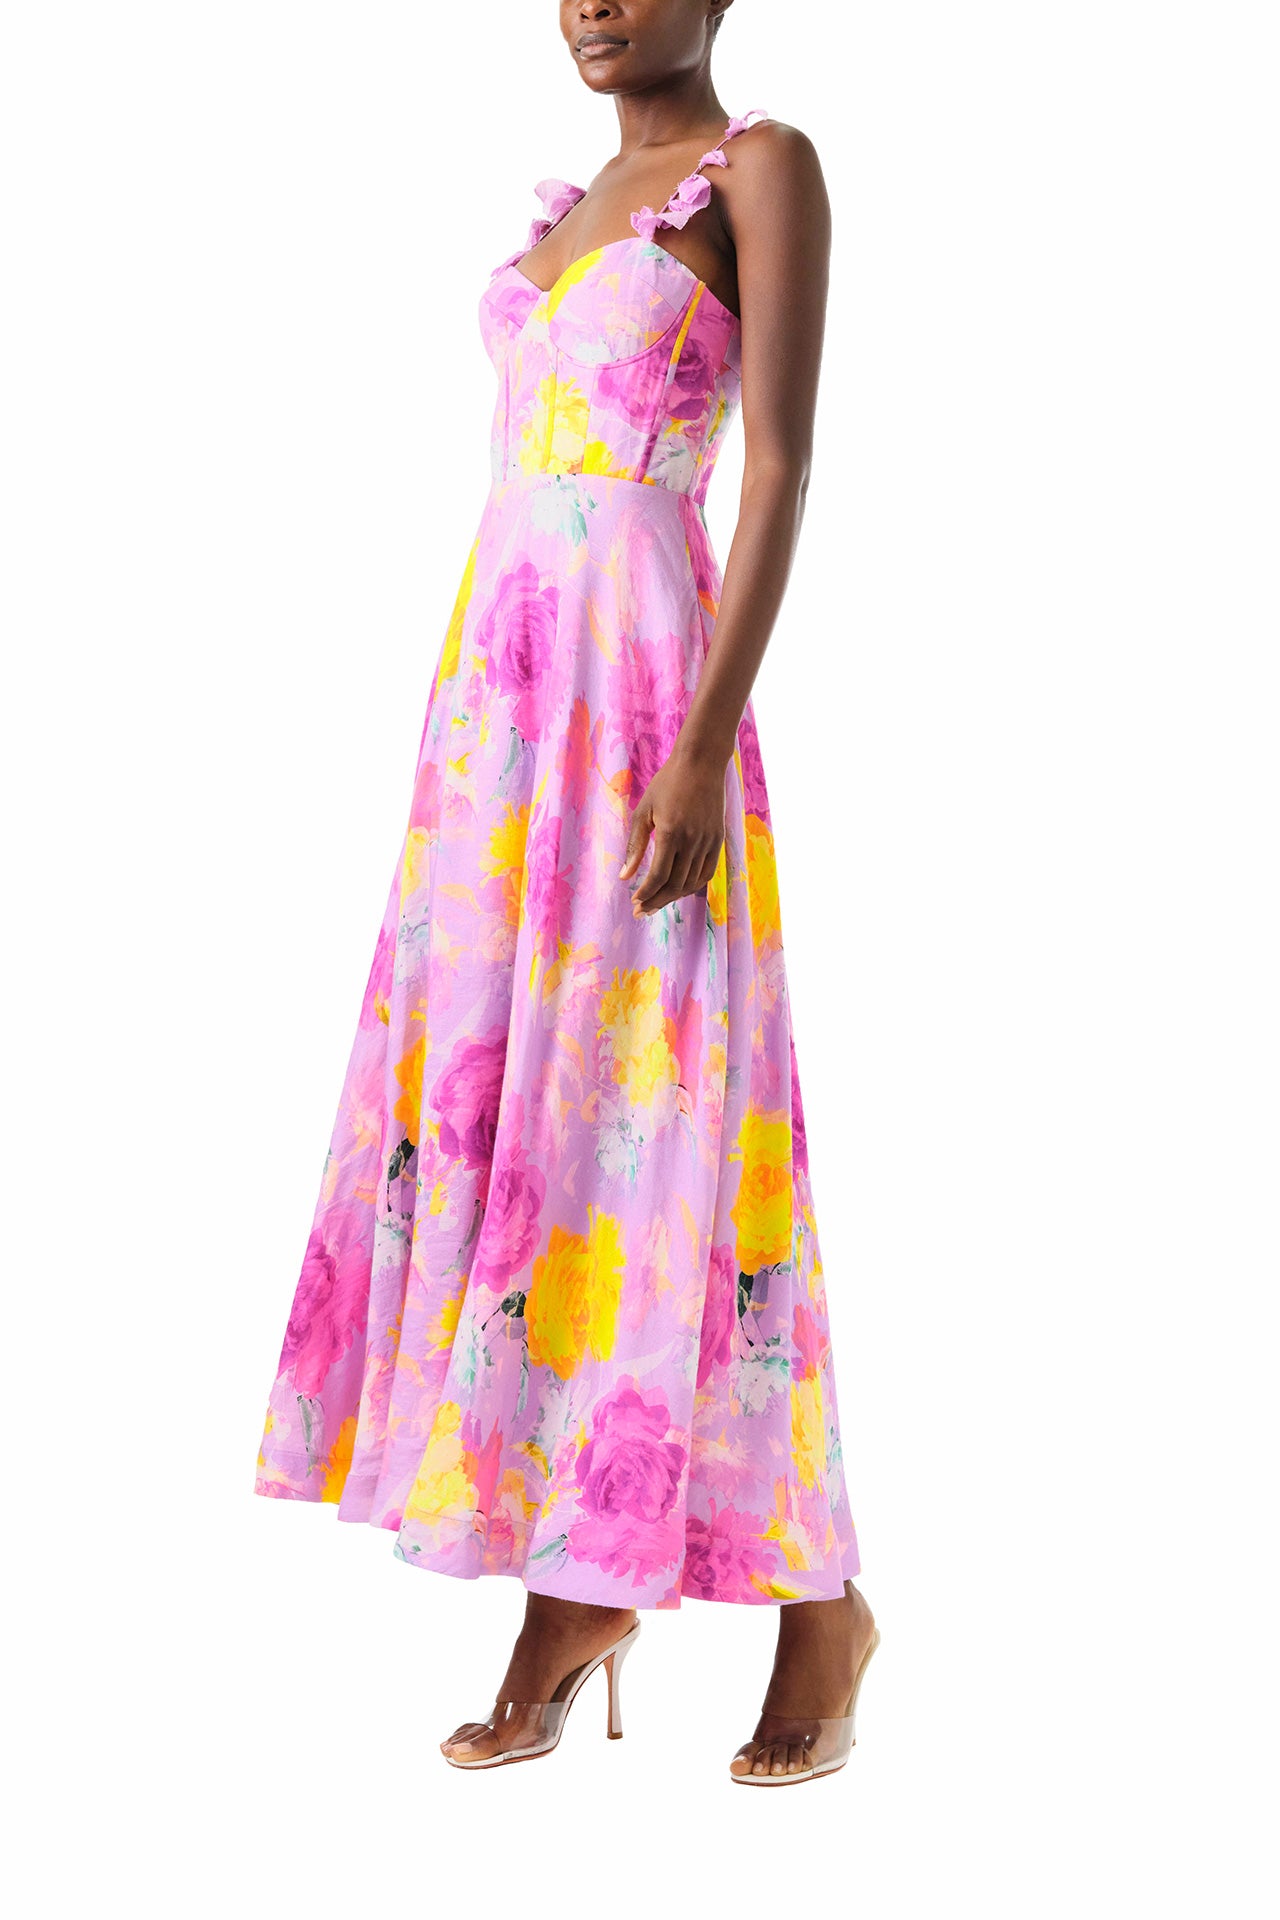 ML Monique Lhuillier 2024 Sleeveless midi dress with floral appliqued spaghetti straps and corset bodice in pink, purple and yellow floral printed linen - left side.